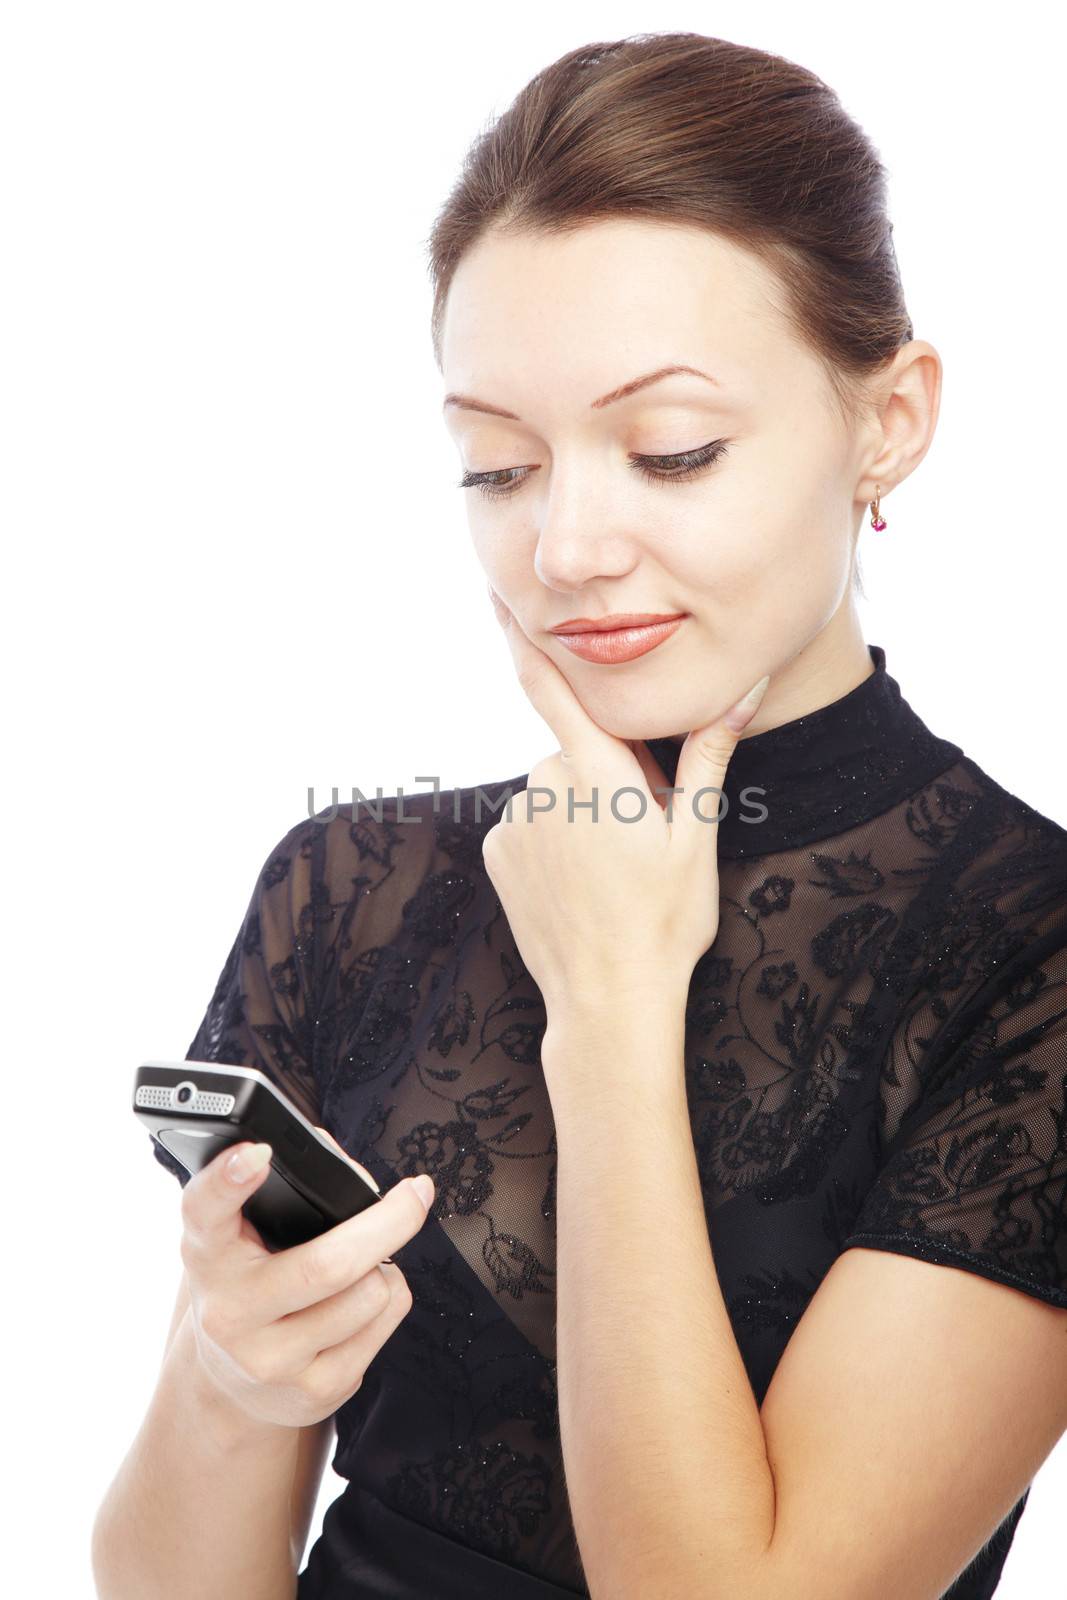 Thinking lady with cellphone reading SMS